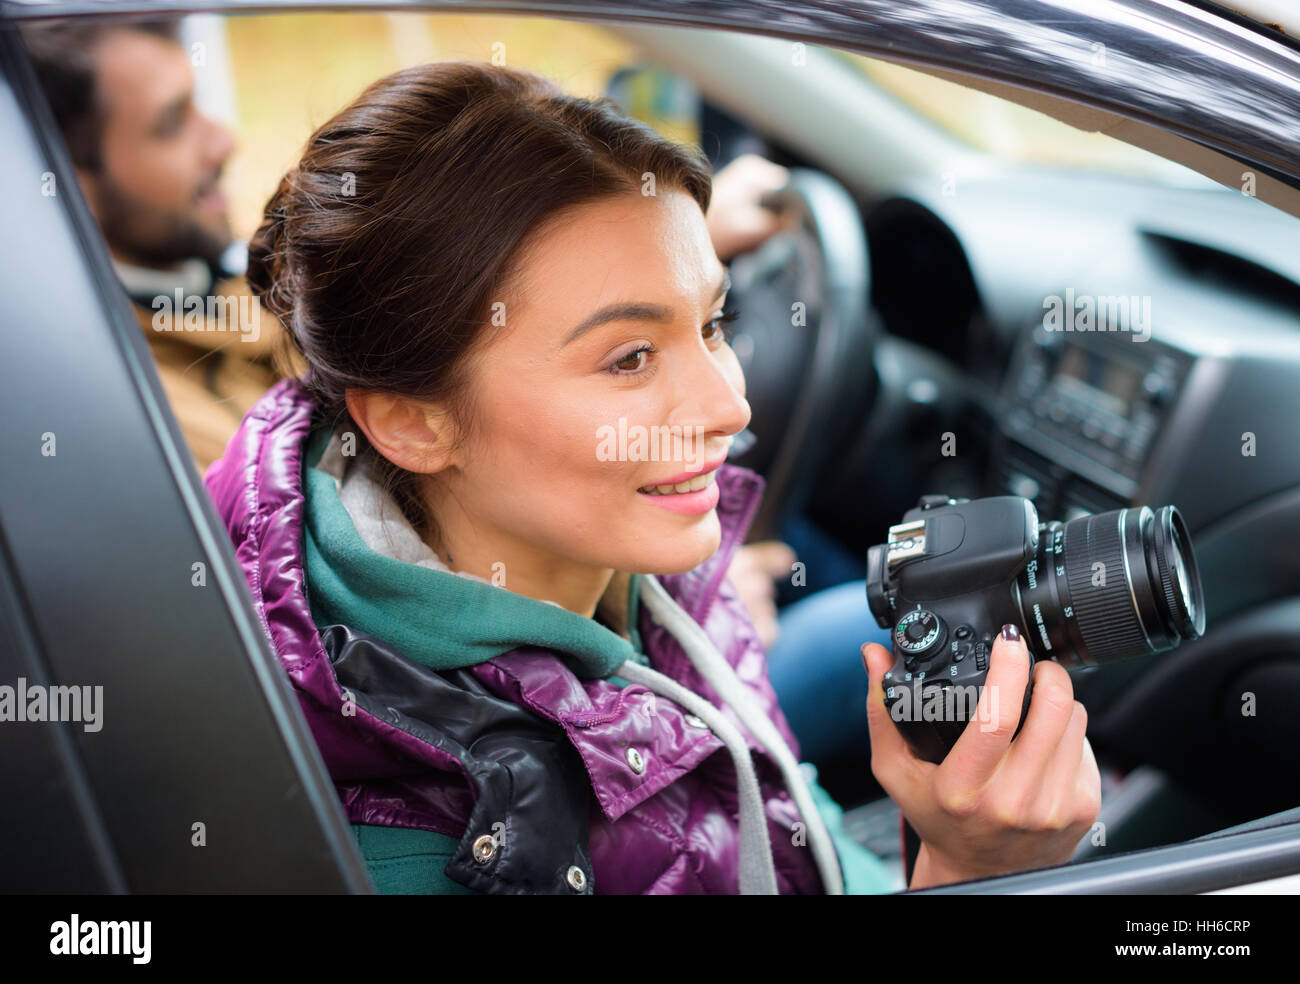 Smiling brunette woman holding photo camera and looking in car window with blurred male driver on background Stock Photo